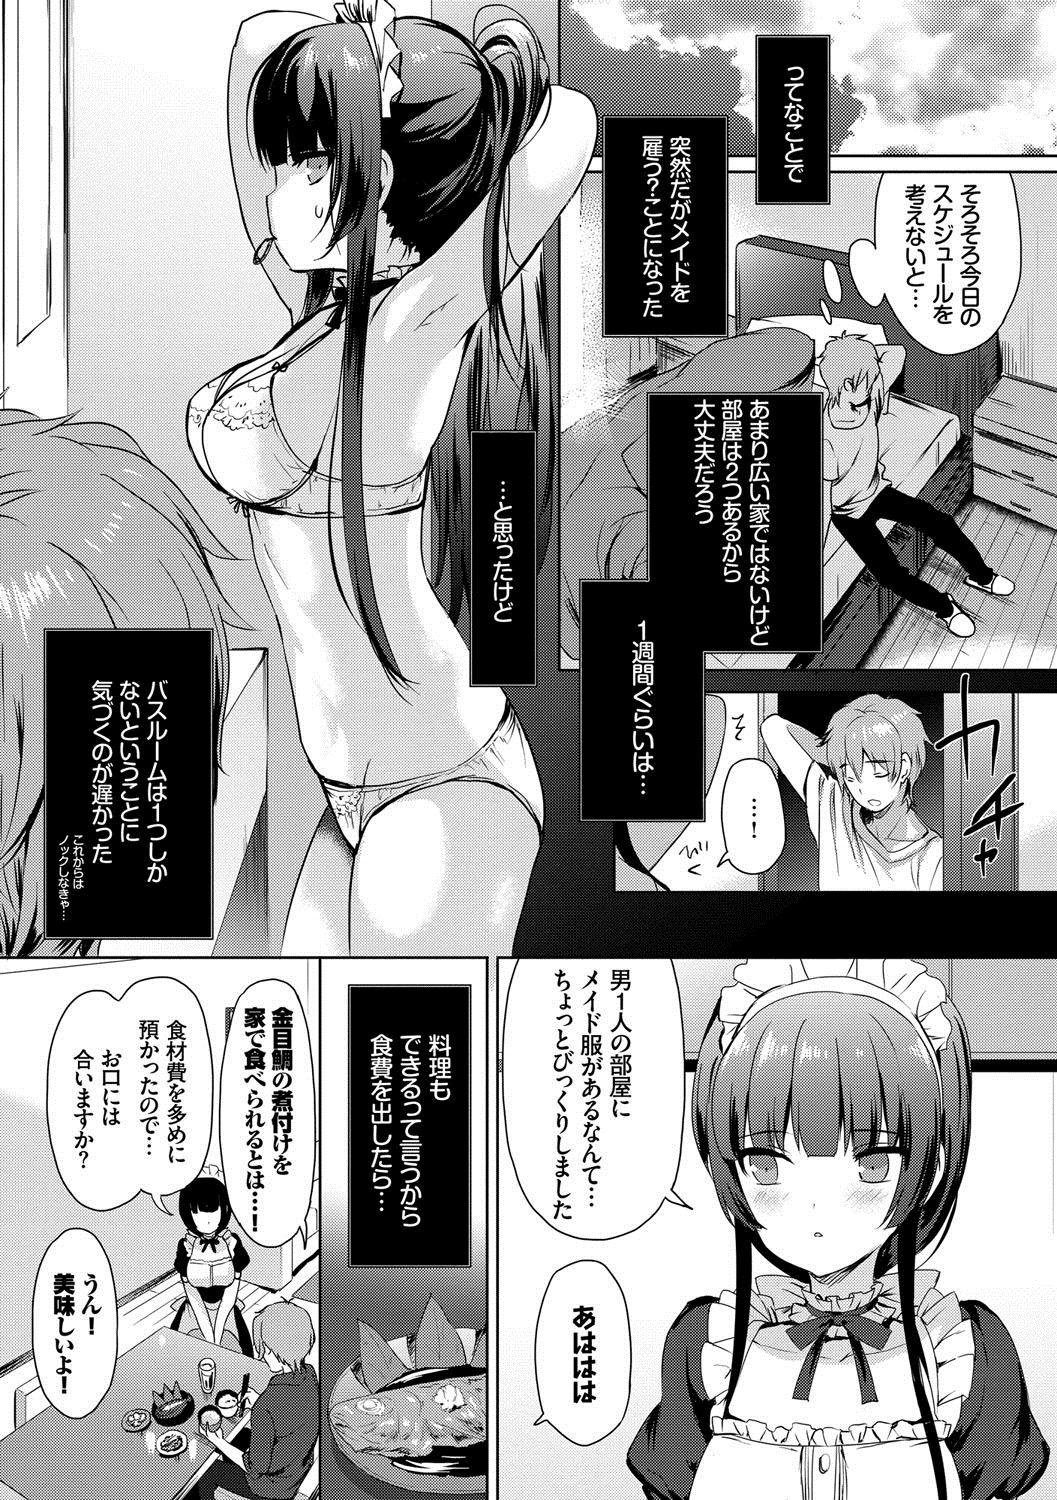 Ride Renai Specialite - Love Specialties Old Young - Page 12